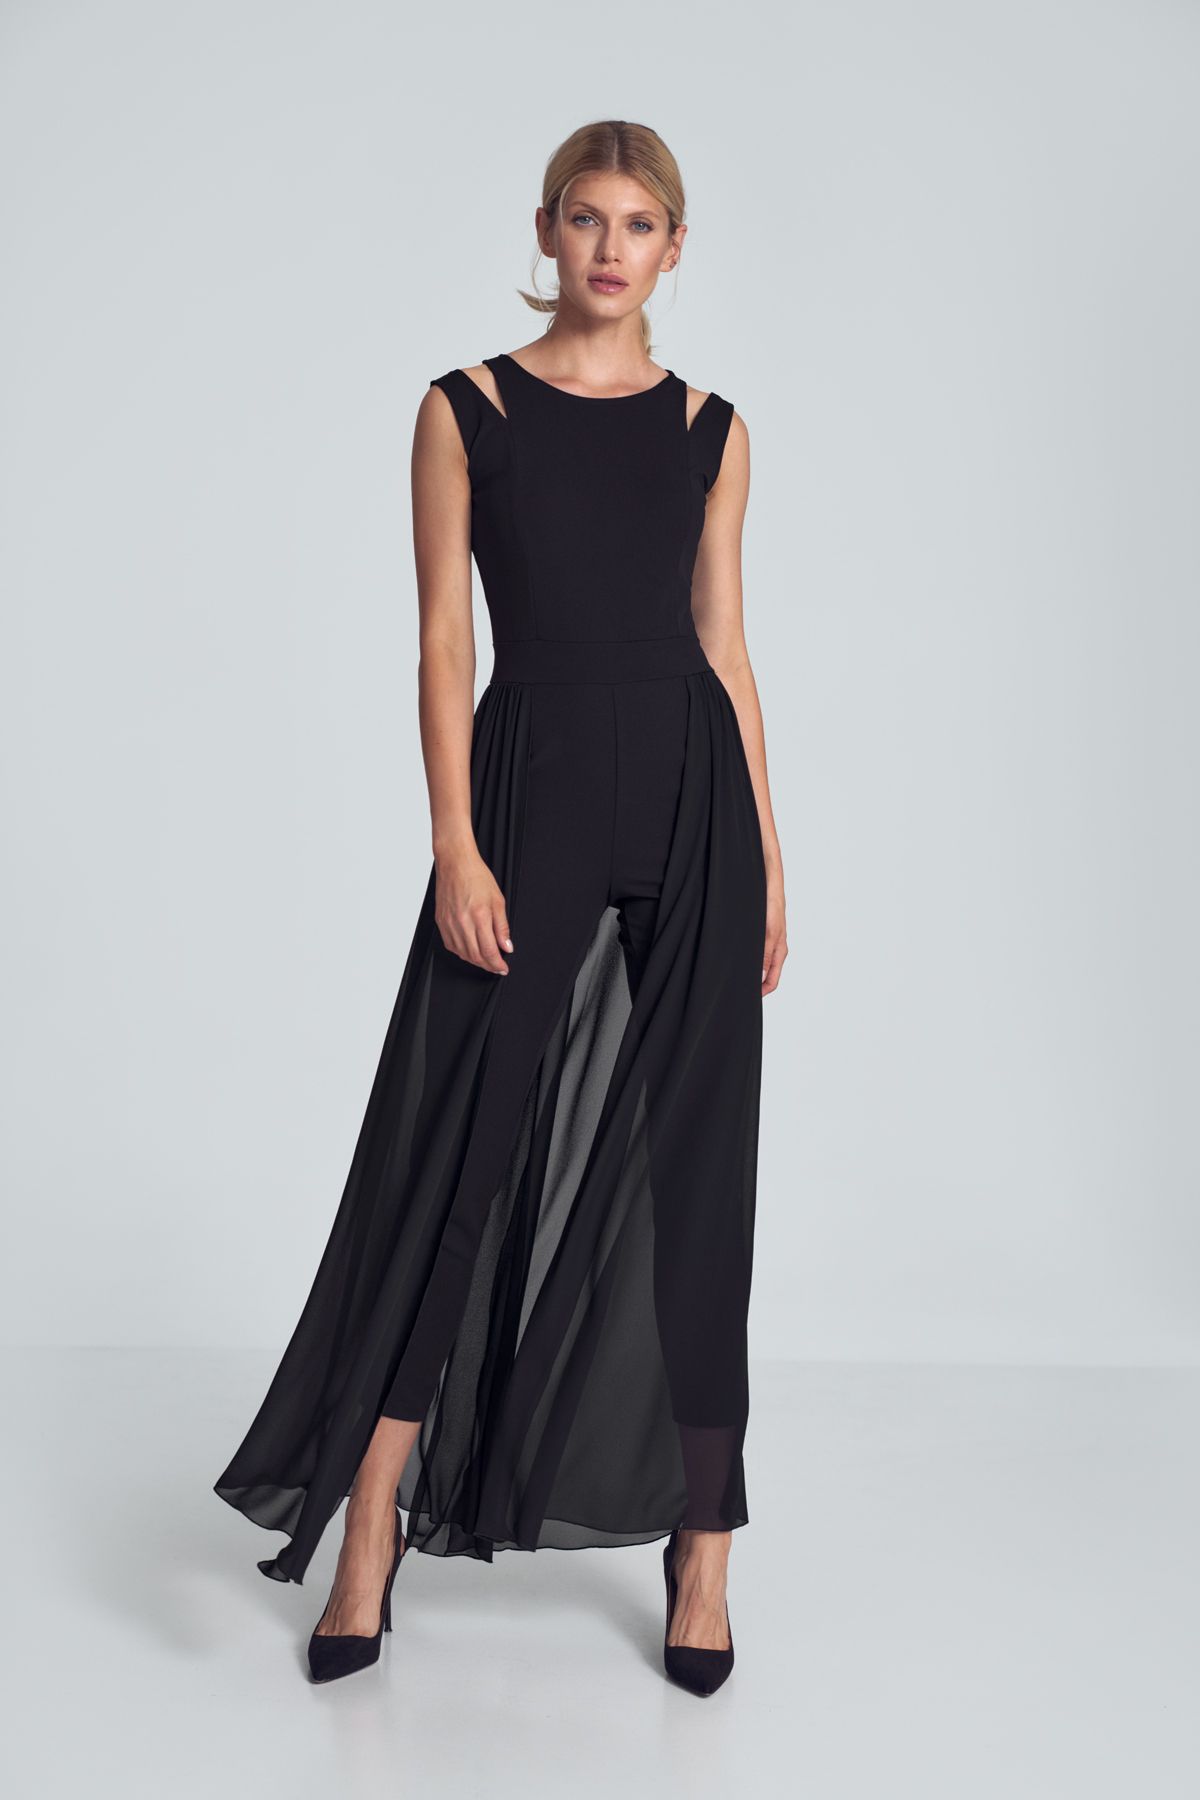 Black jumpsuit with long chiffon skirt slit at the back. Sleeveless, delicate decorative slits on the shoulders, a small semi-circular neckline. Heavily tapered legs. Fastened at the back with a covered long zipper.